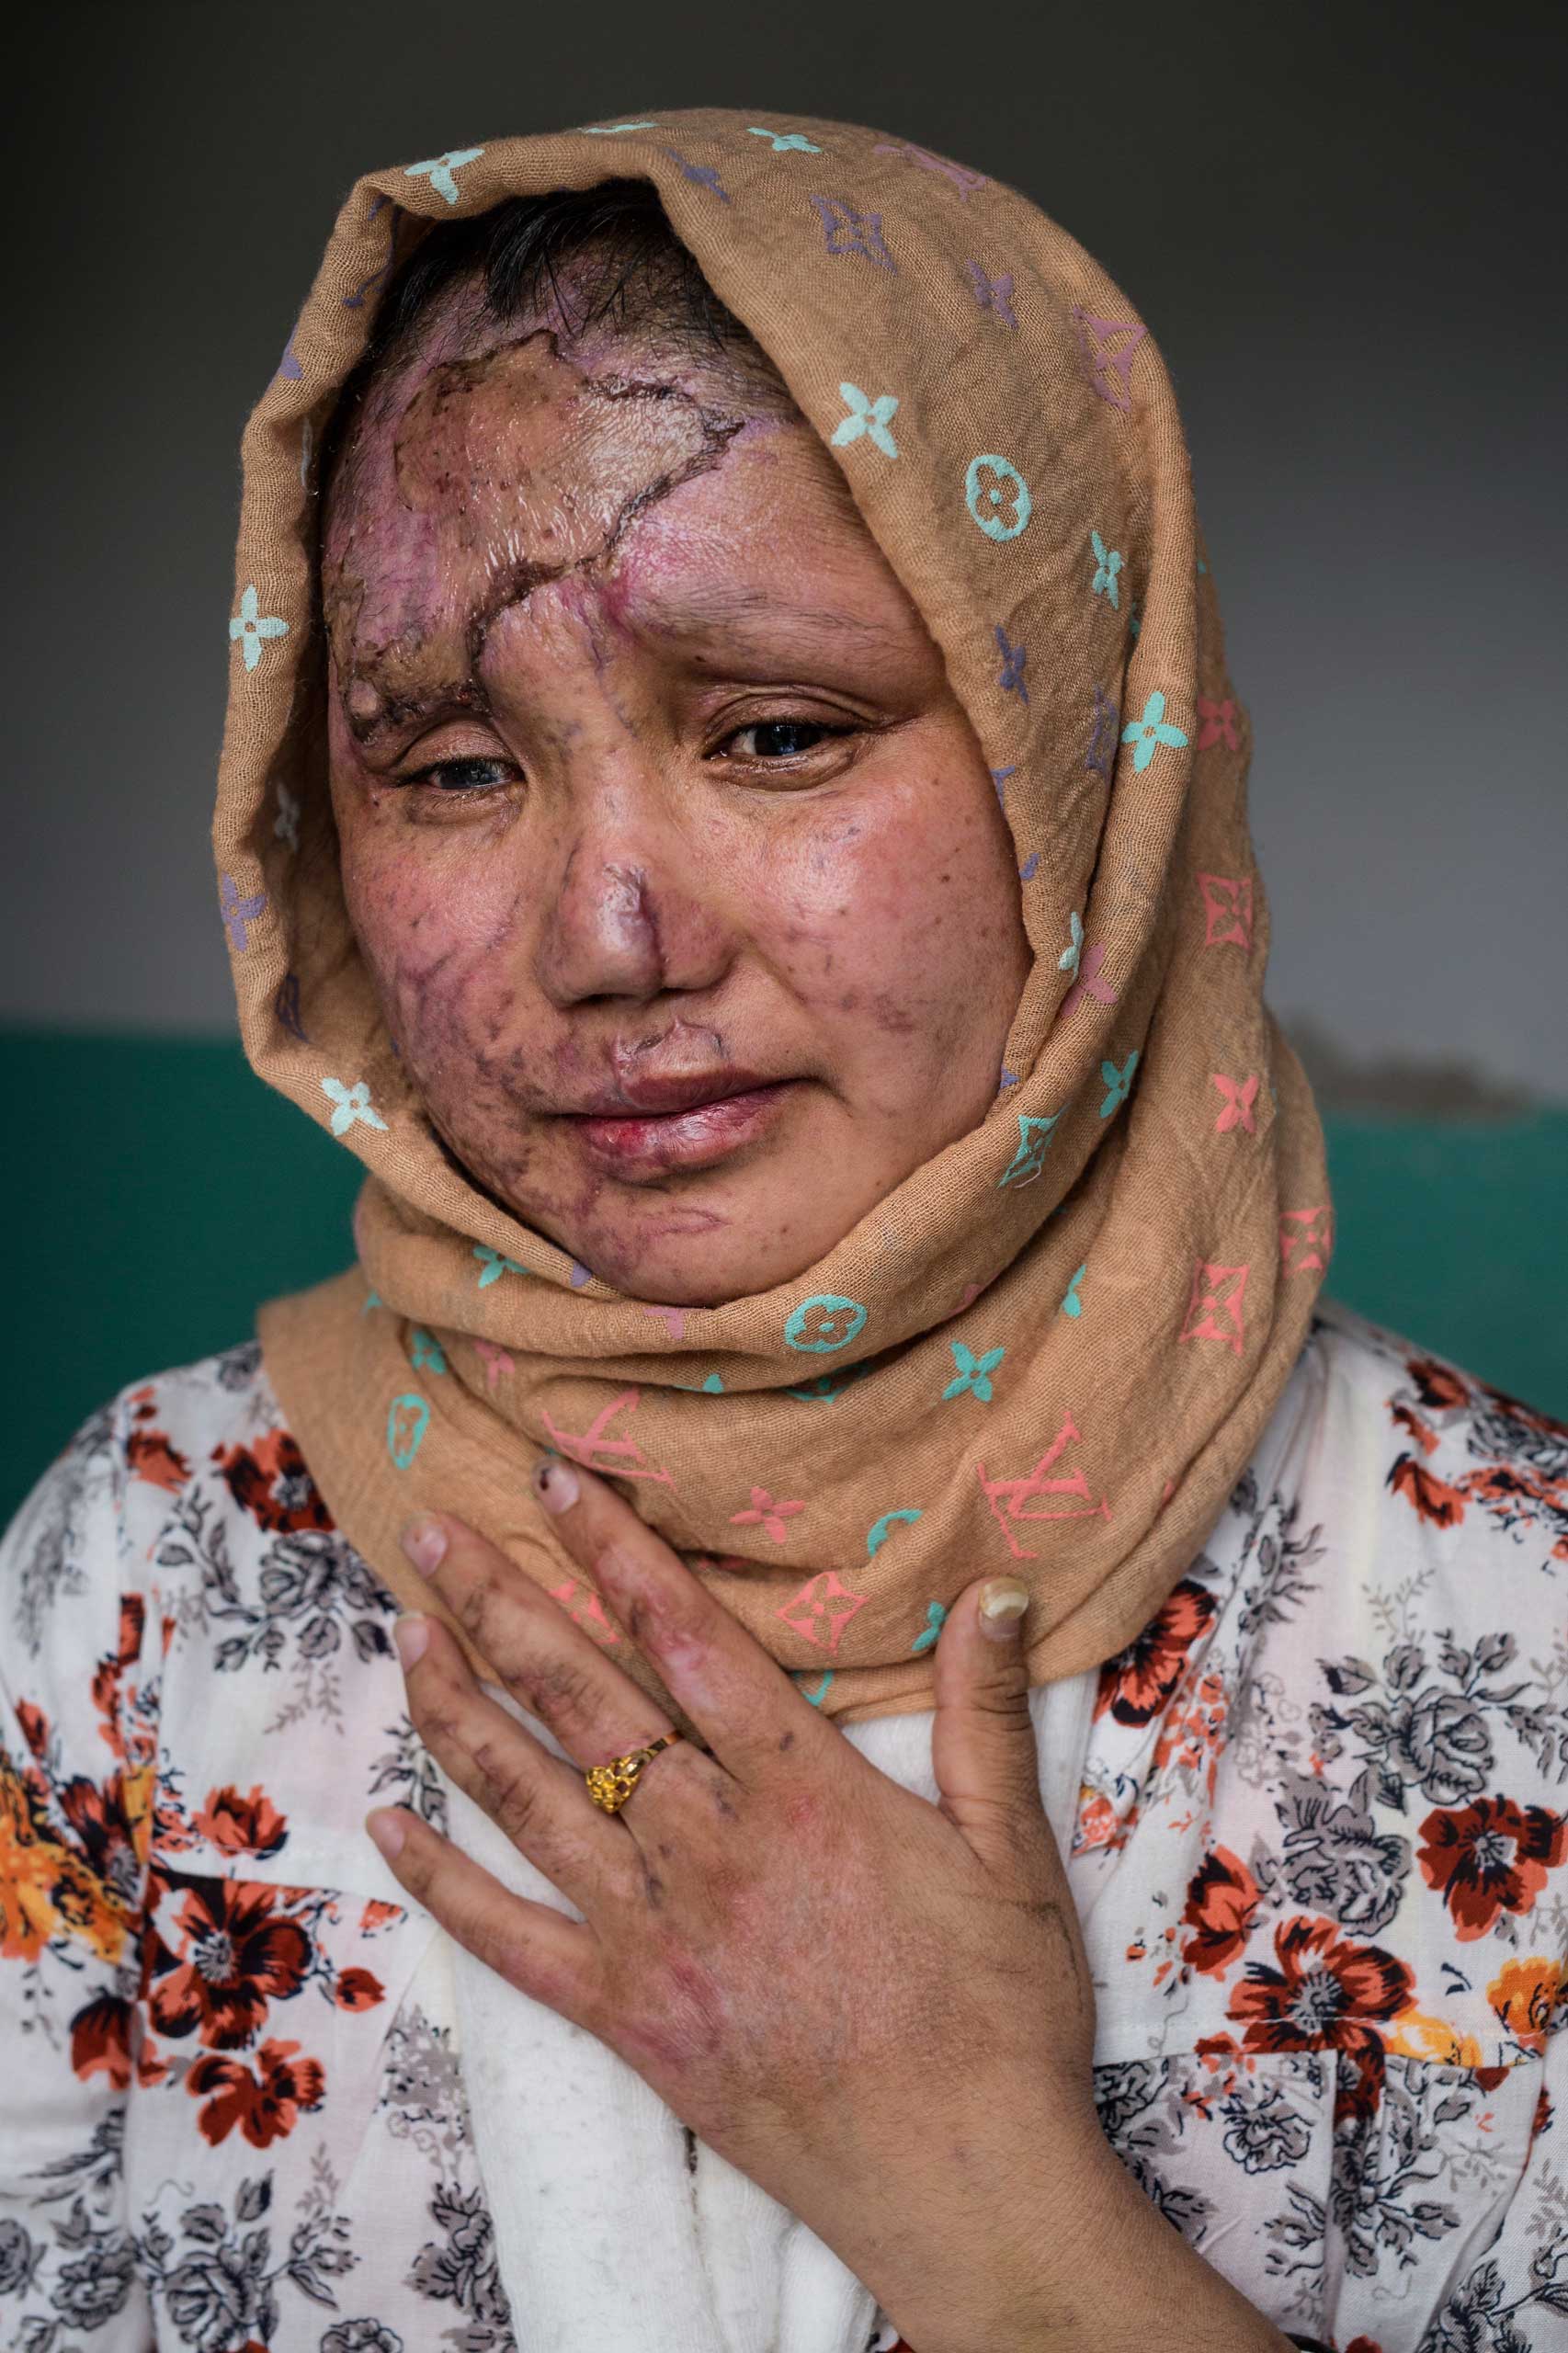 Razia Noorizada Didar, 30, was one of the seriously wounded victims that worked with Tolo TV for a decade. Razia has a lost sight in her left eye, and has several fractured bones. Her face is scarred from burns and shrapnel. The employees had finished a day’s work at Tolo TV, one of Afghanistan’s largest entertainment channels, when they boarded a company bus in Kabul on April 9, 2016. It was rammed by a car driven by a Taliban suicide bomber. Seven people were killed and at least 25 wounded in the attack.